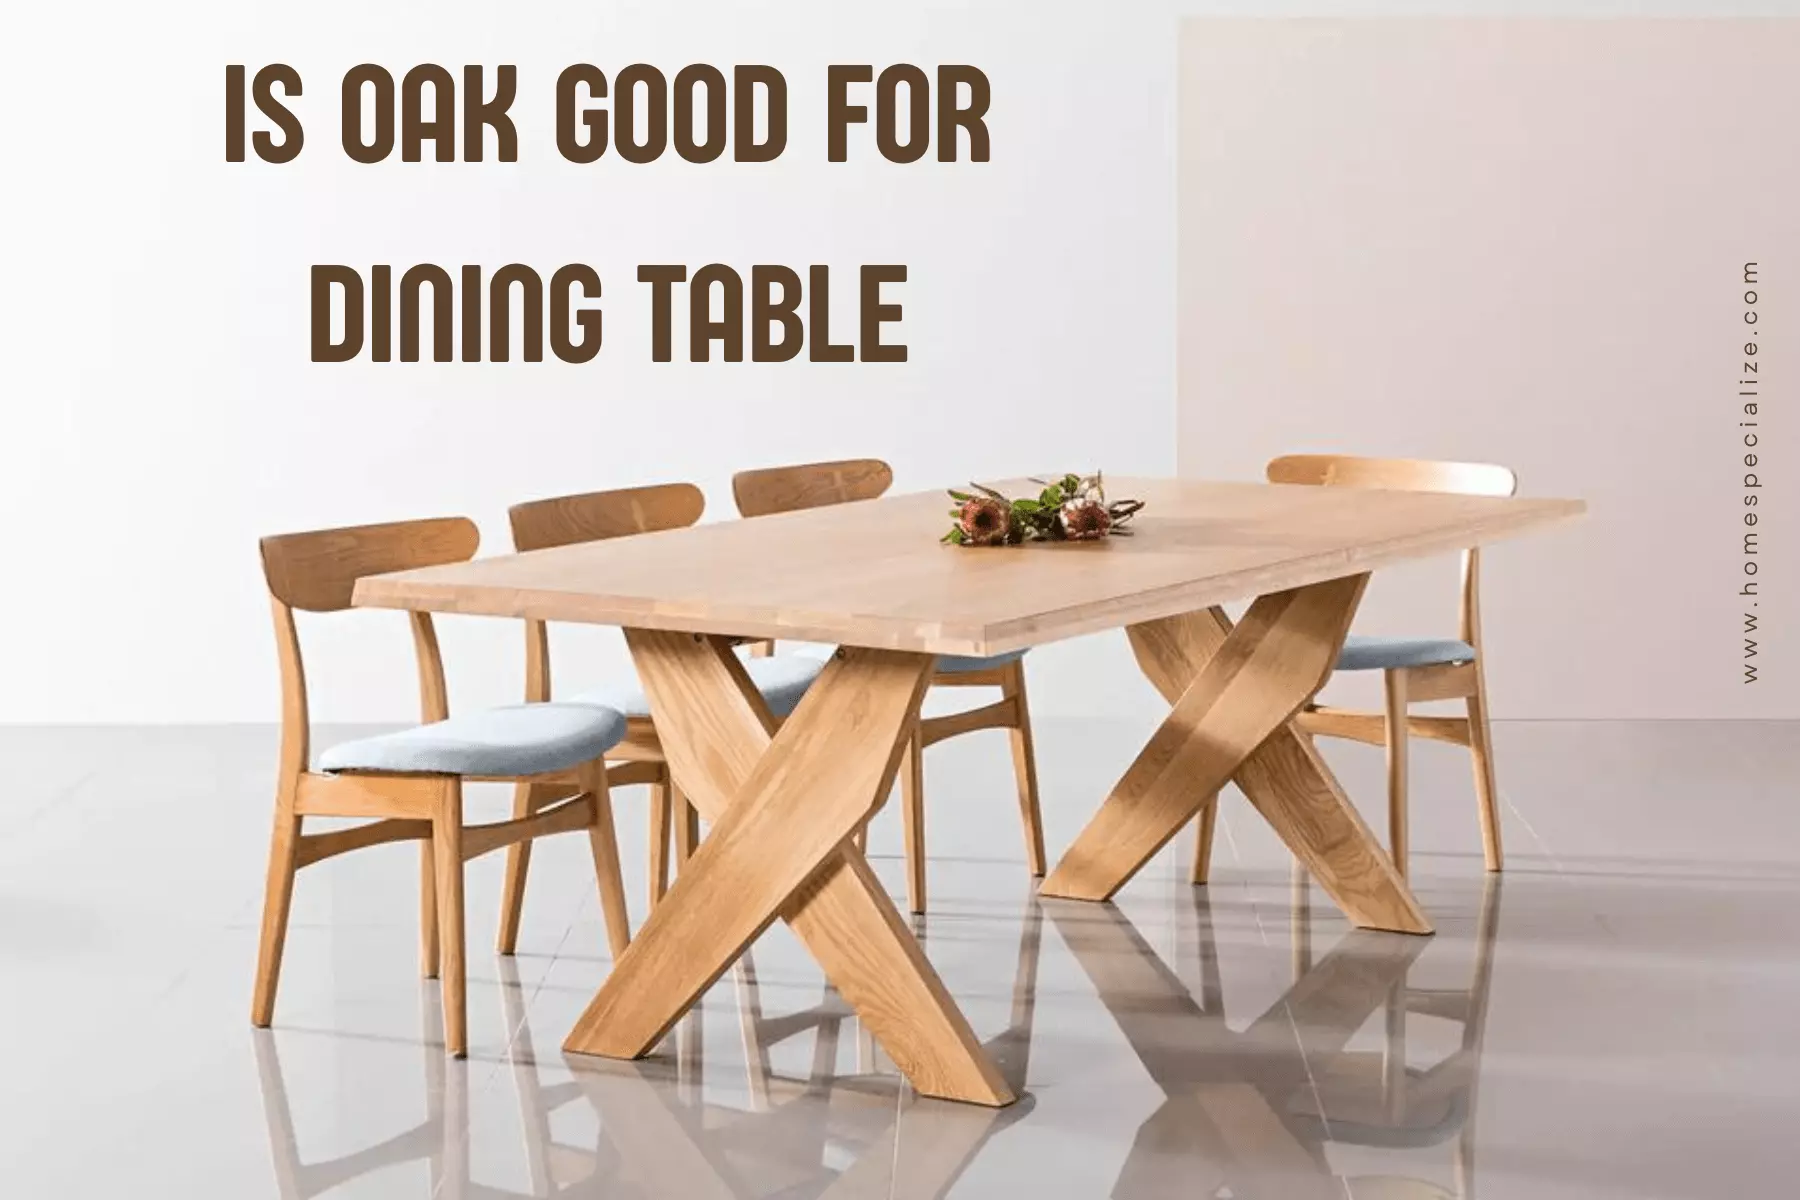 Oak vs. Other Woods: Is Oak Good for Your Dining Table?